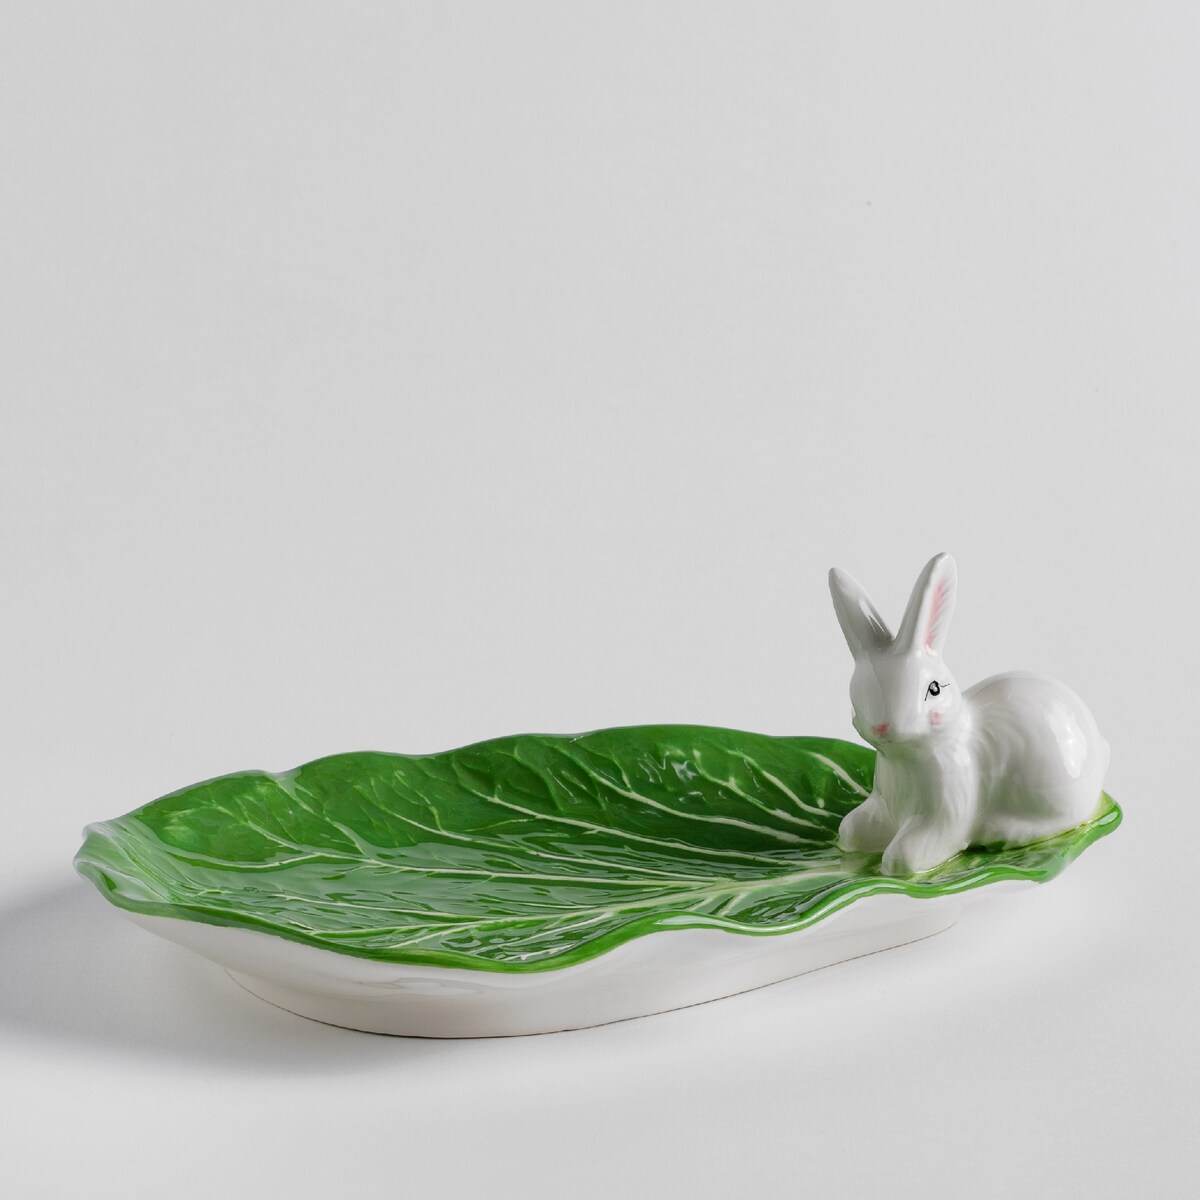 Serving Plate Cabbunny 